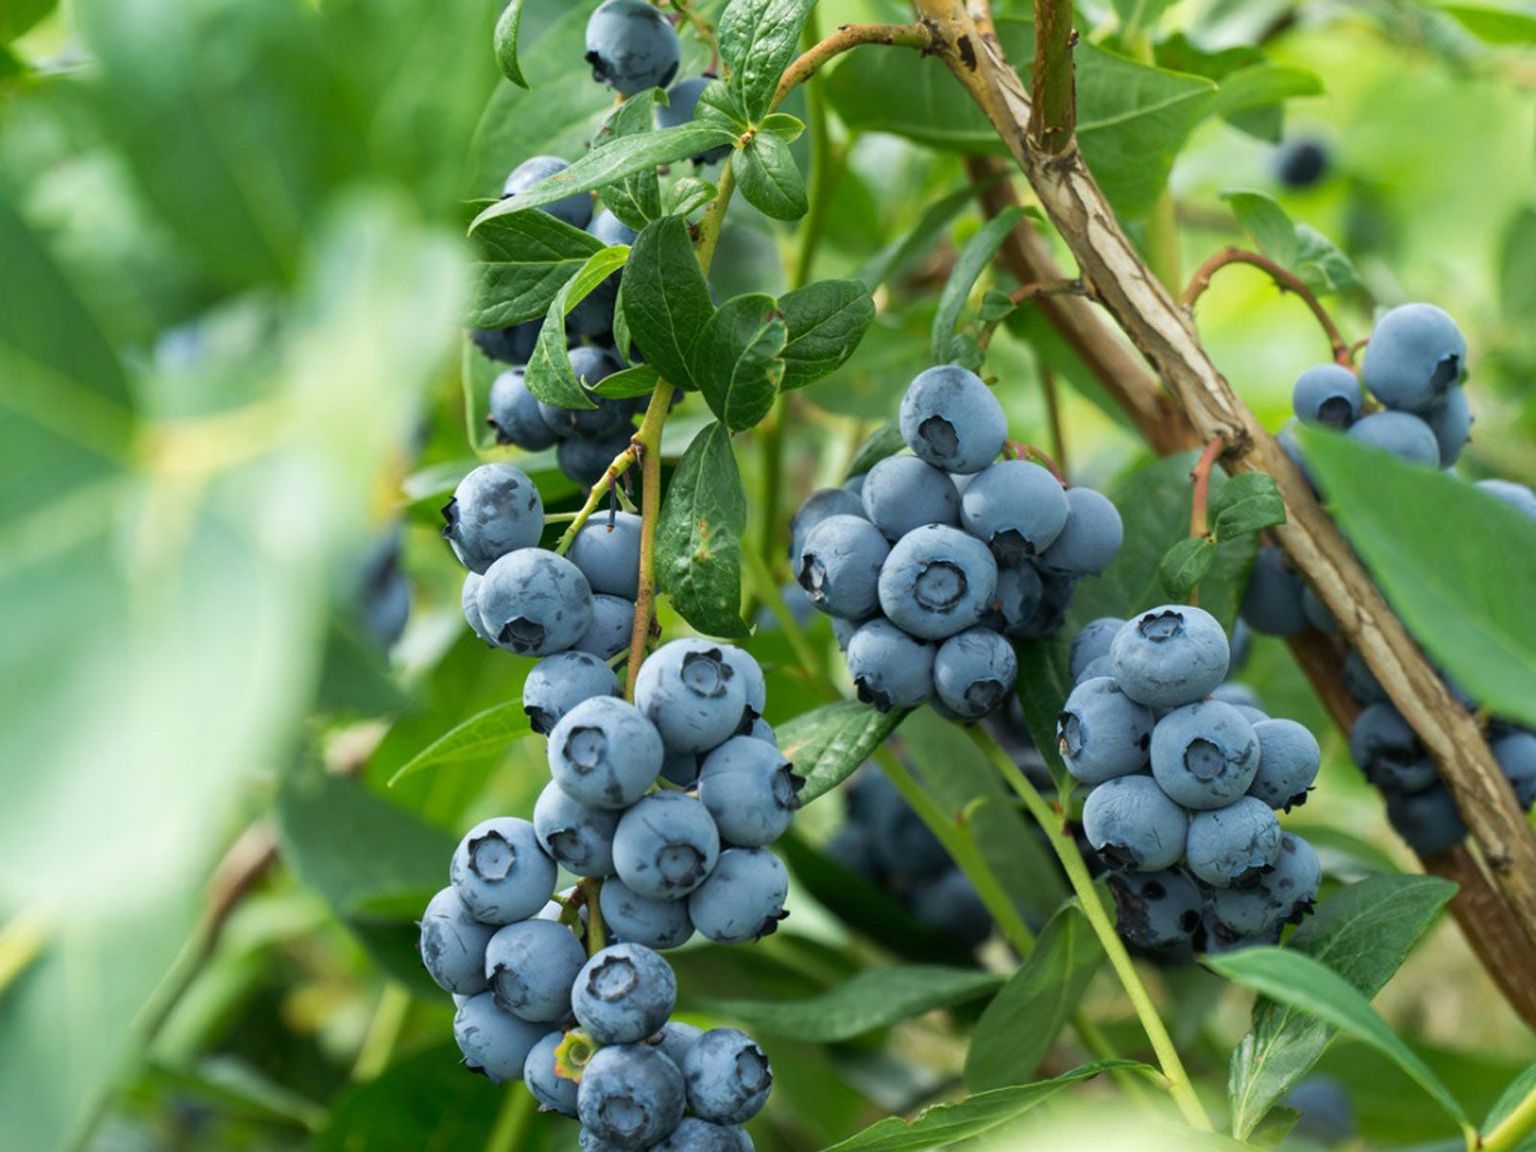 “From Highbush to Wild Mountain: Exploring the Delicious Variety of Blueberries”